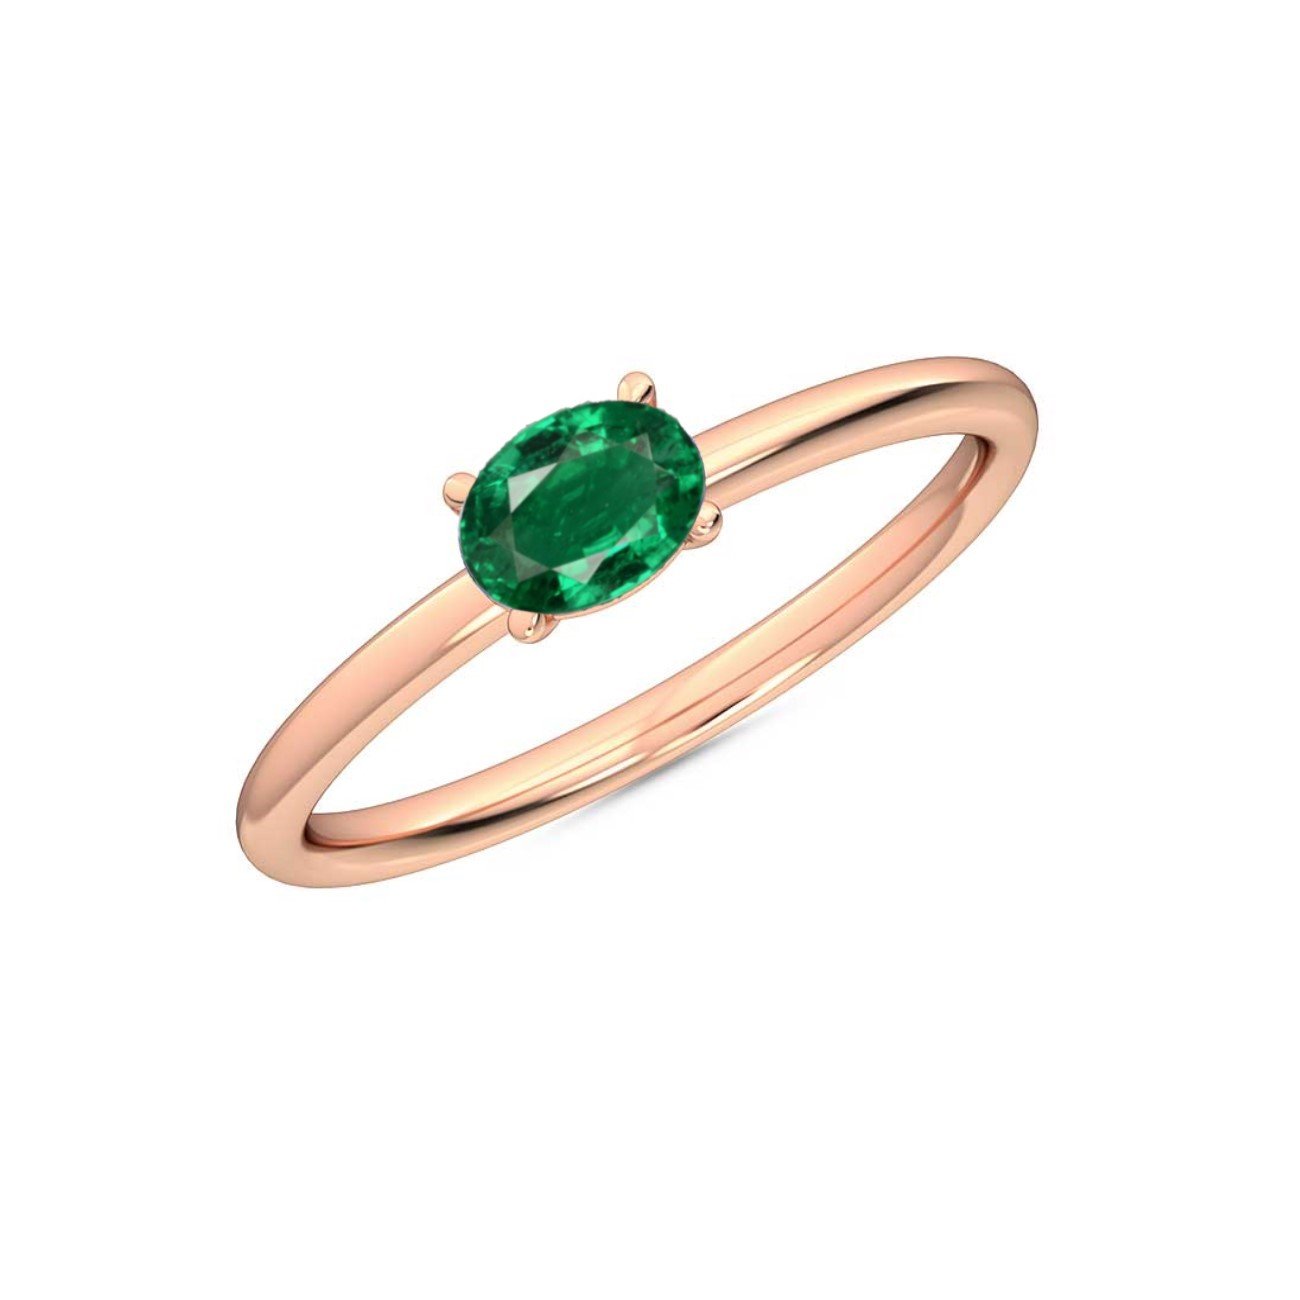 Oval Cut Petite Ruby Emerald Sapphire Ring in 14K White Rose or Yellow Gold, Precious Gemstone Ring for Women, Fine Jewelry